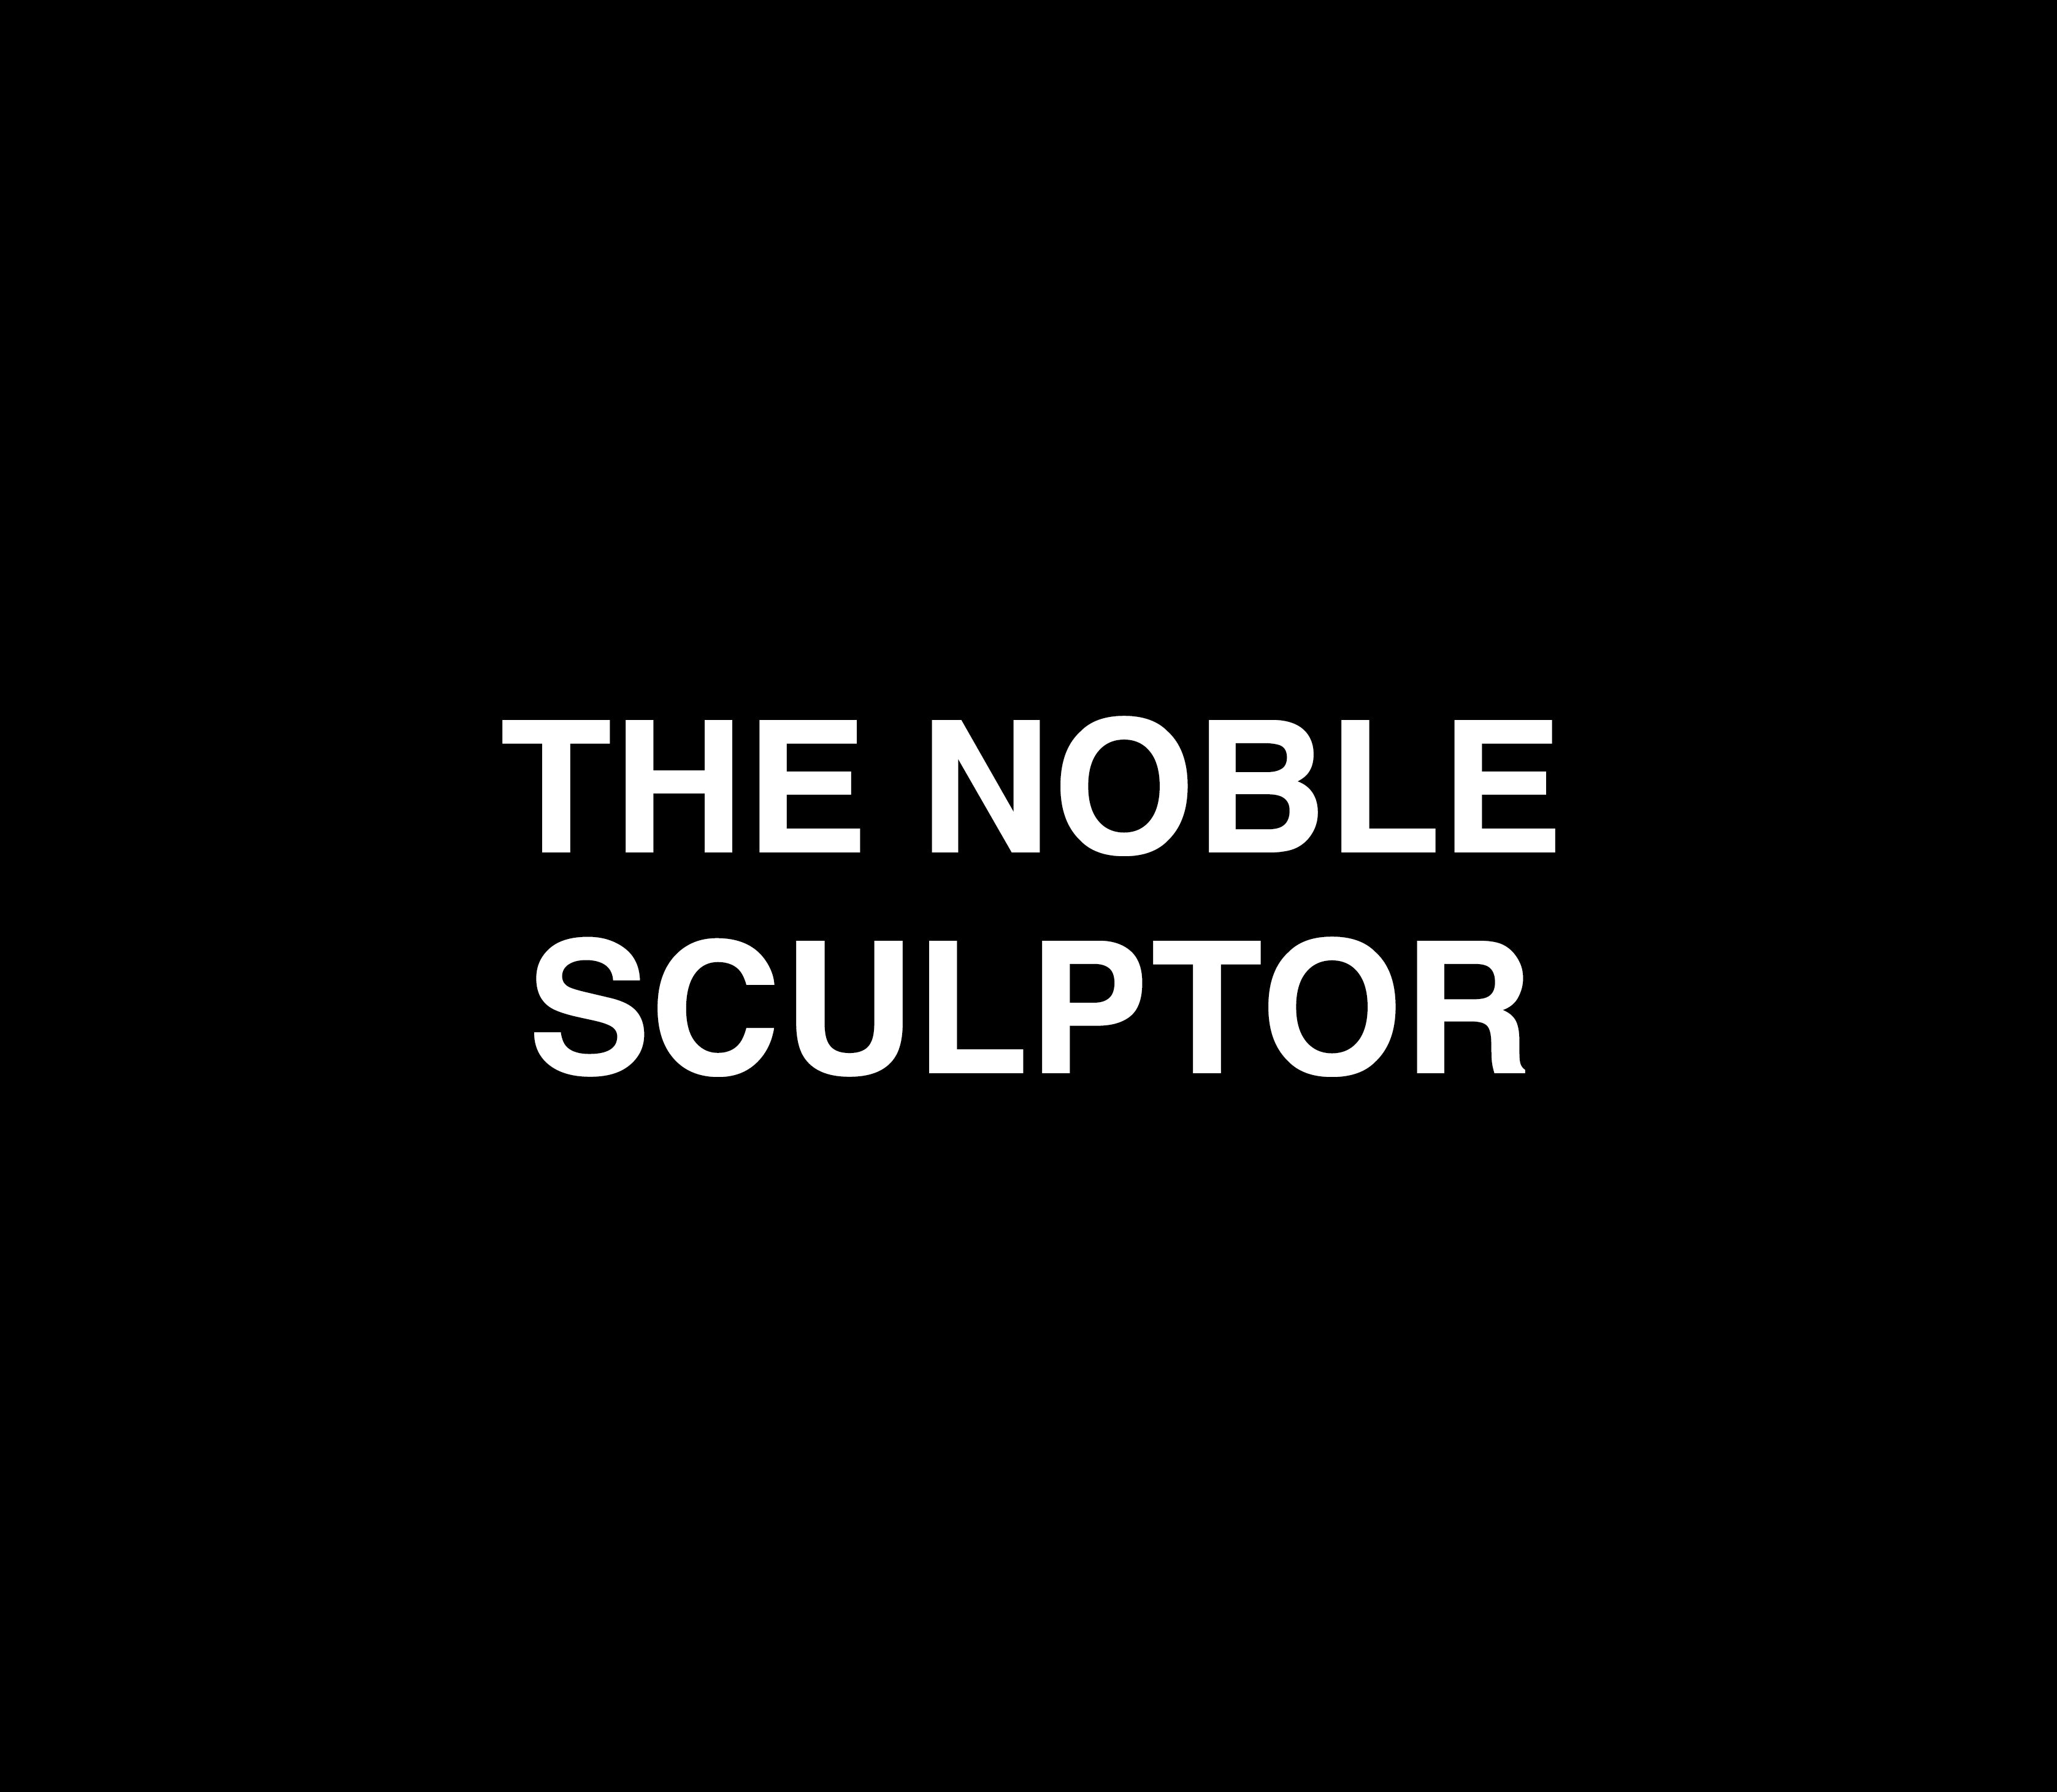 THE NOBLE SCULPTOR